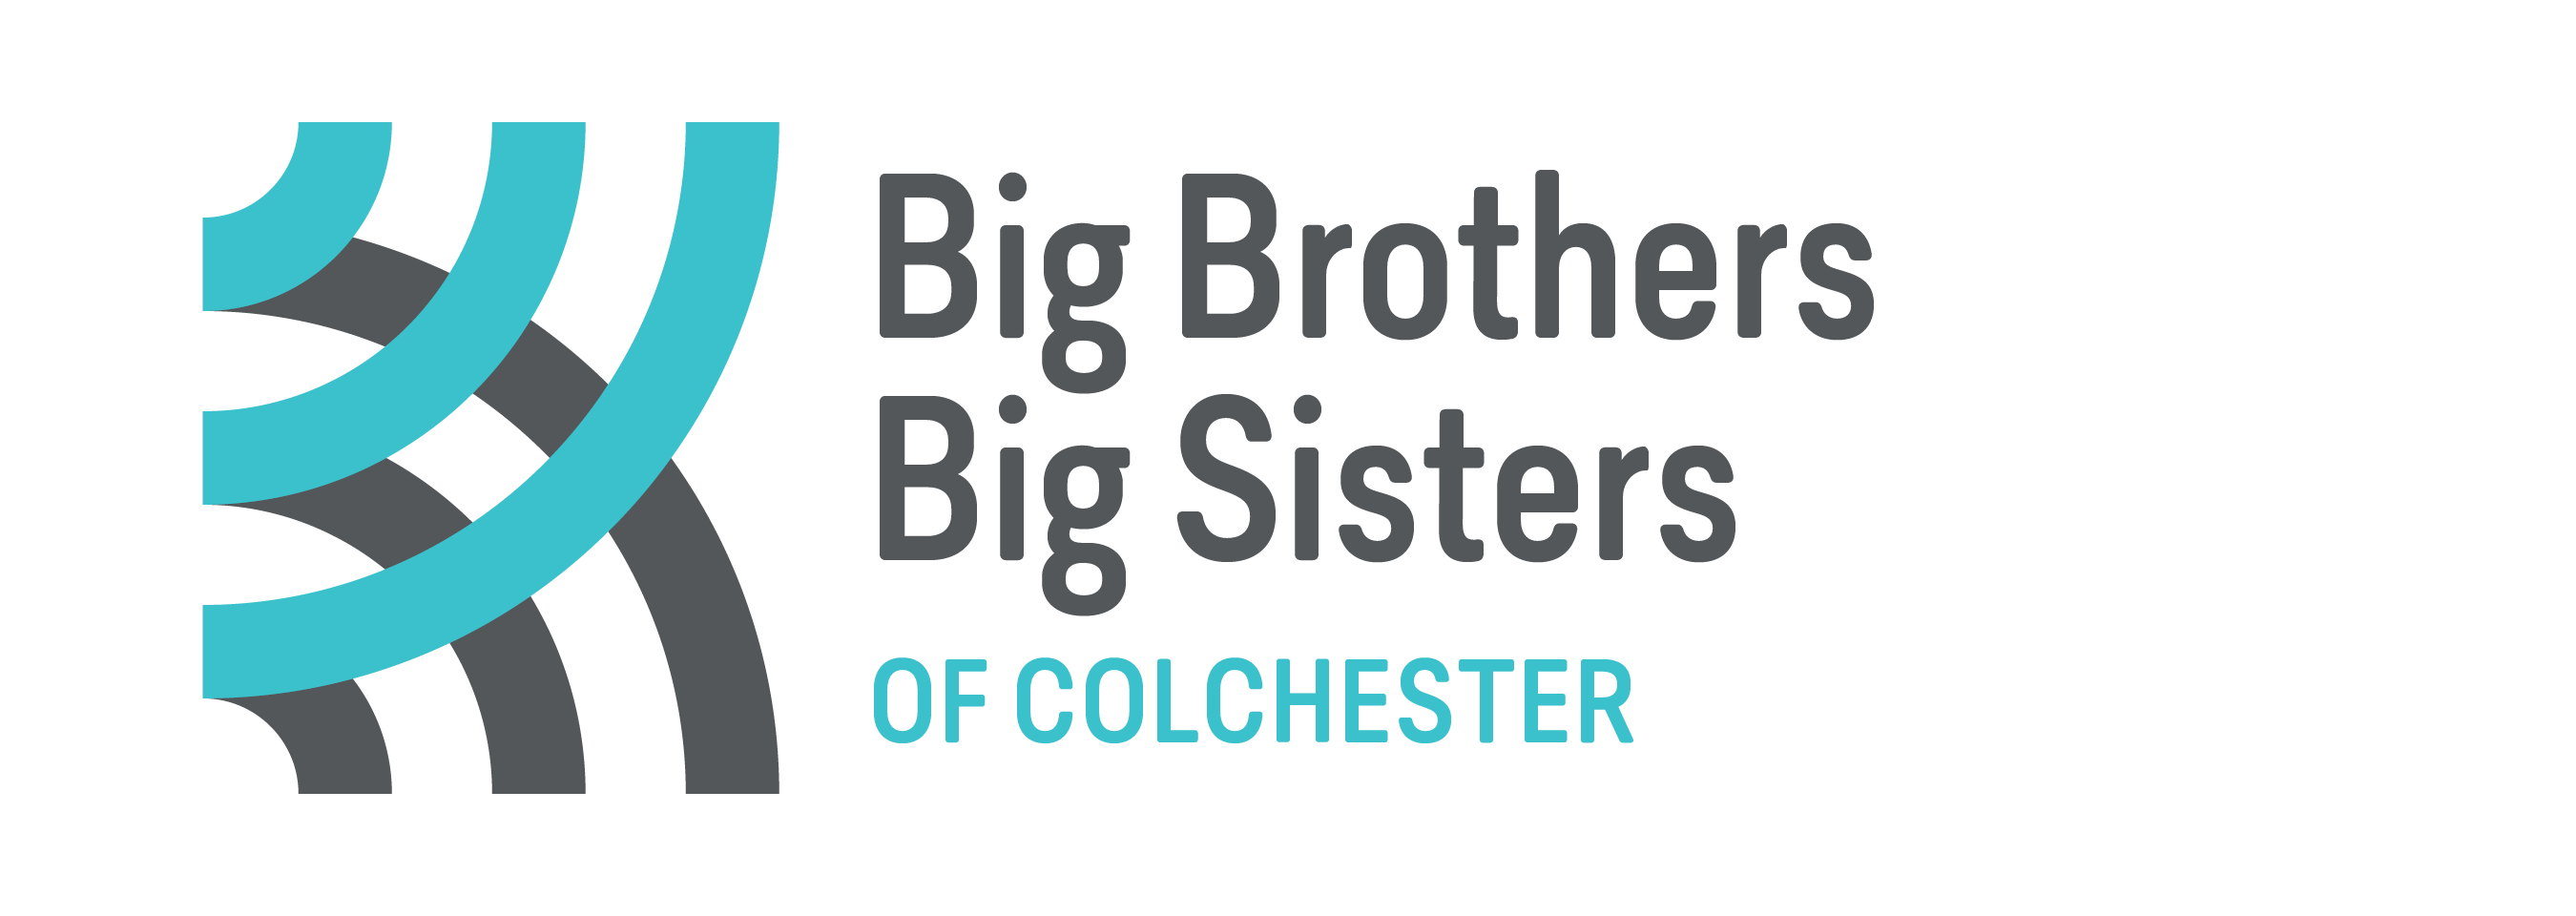 Big Brothers Big Sisters of Colchester